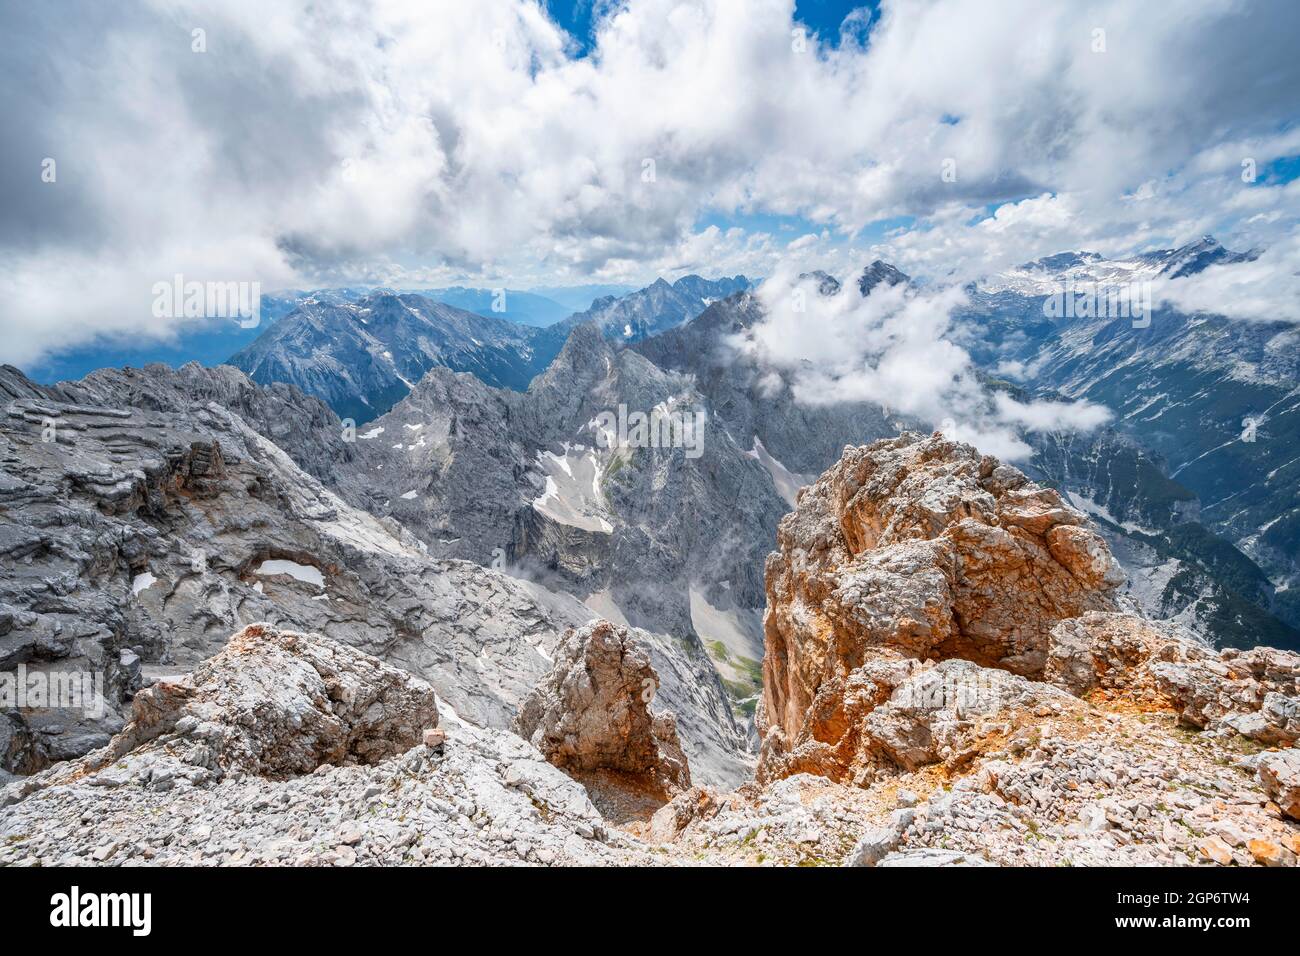 At the summit of the Partenkirchner Dreitorspitze, view into the Reintal valley towards cloud-covered peaks, mountain panorama with ridge of the Stock Photo